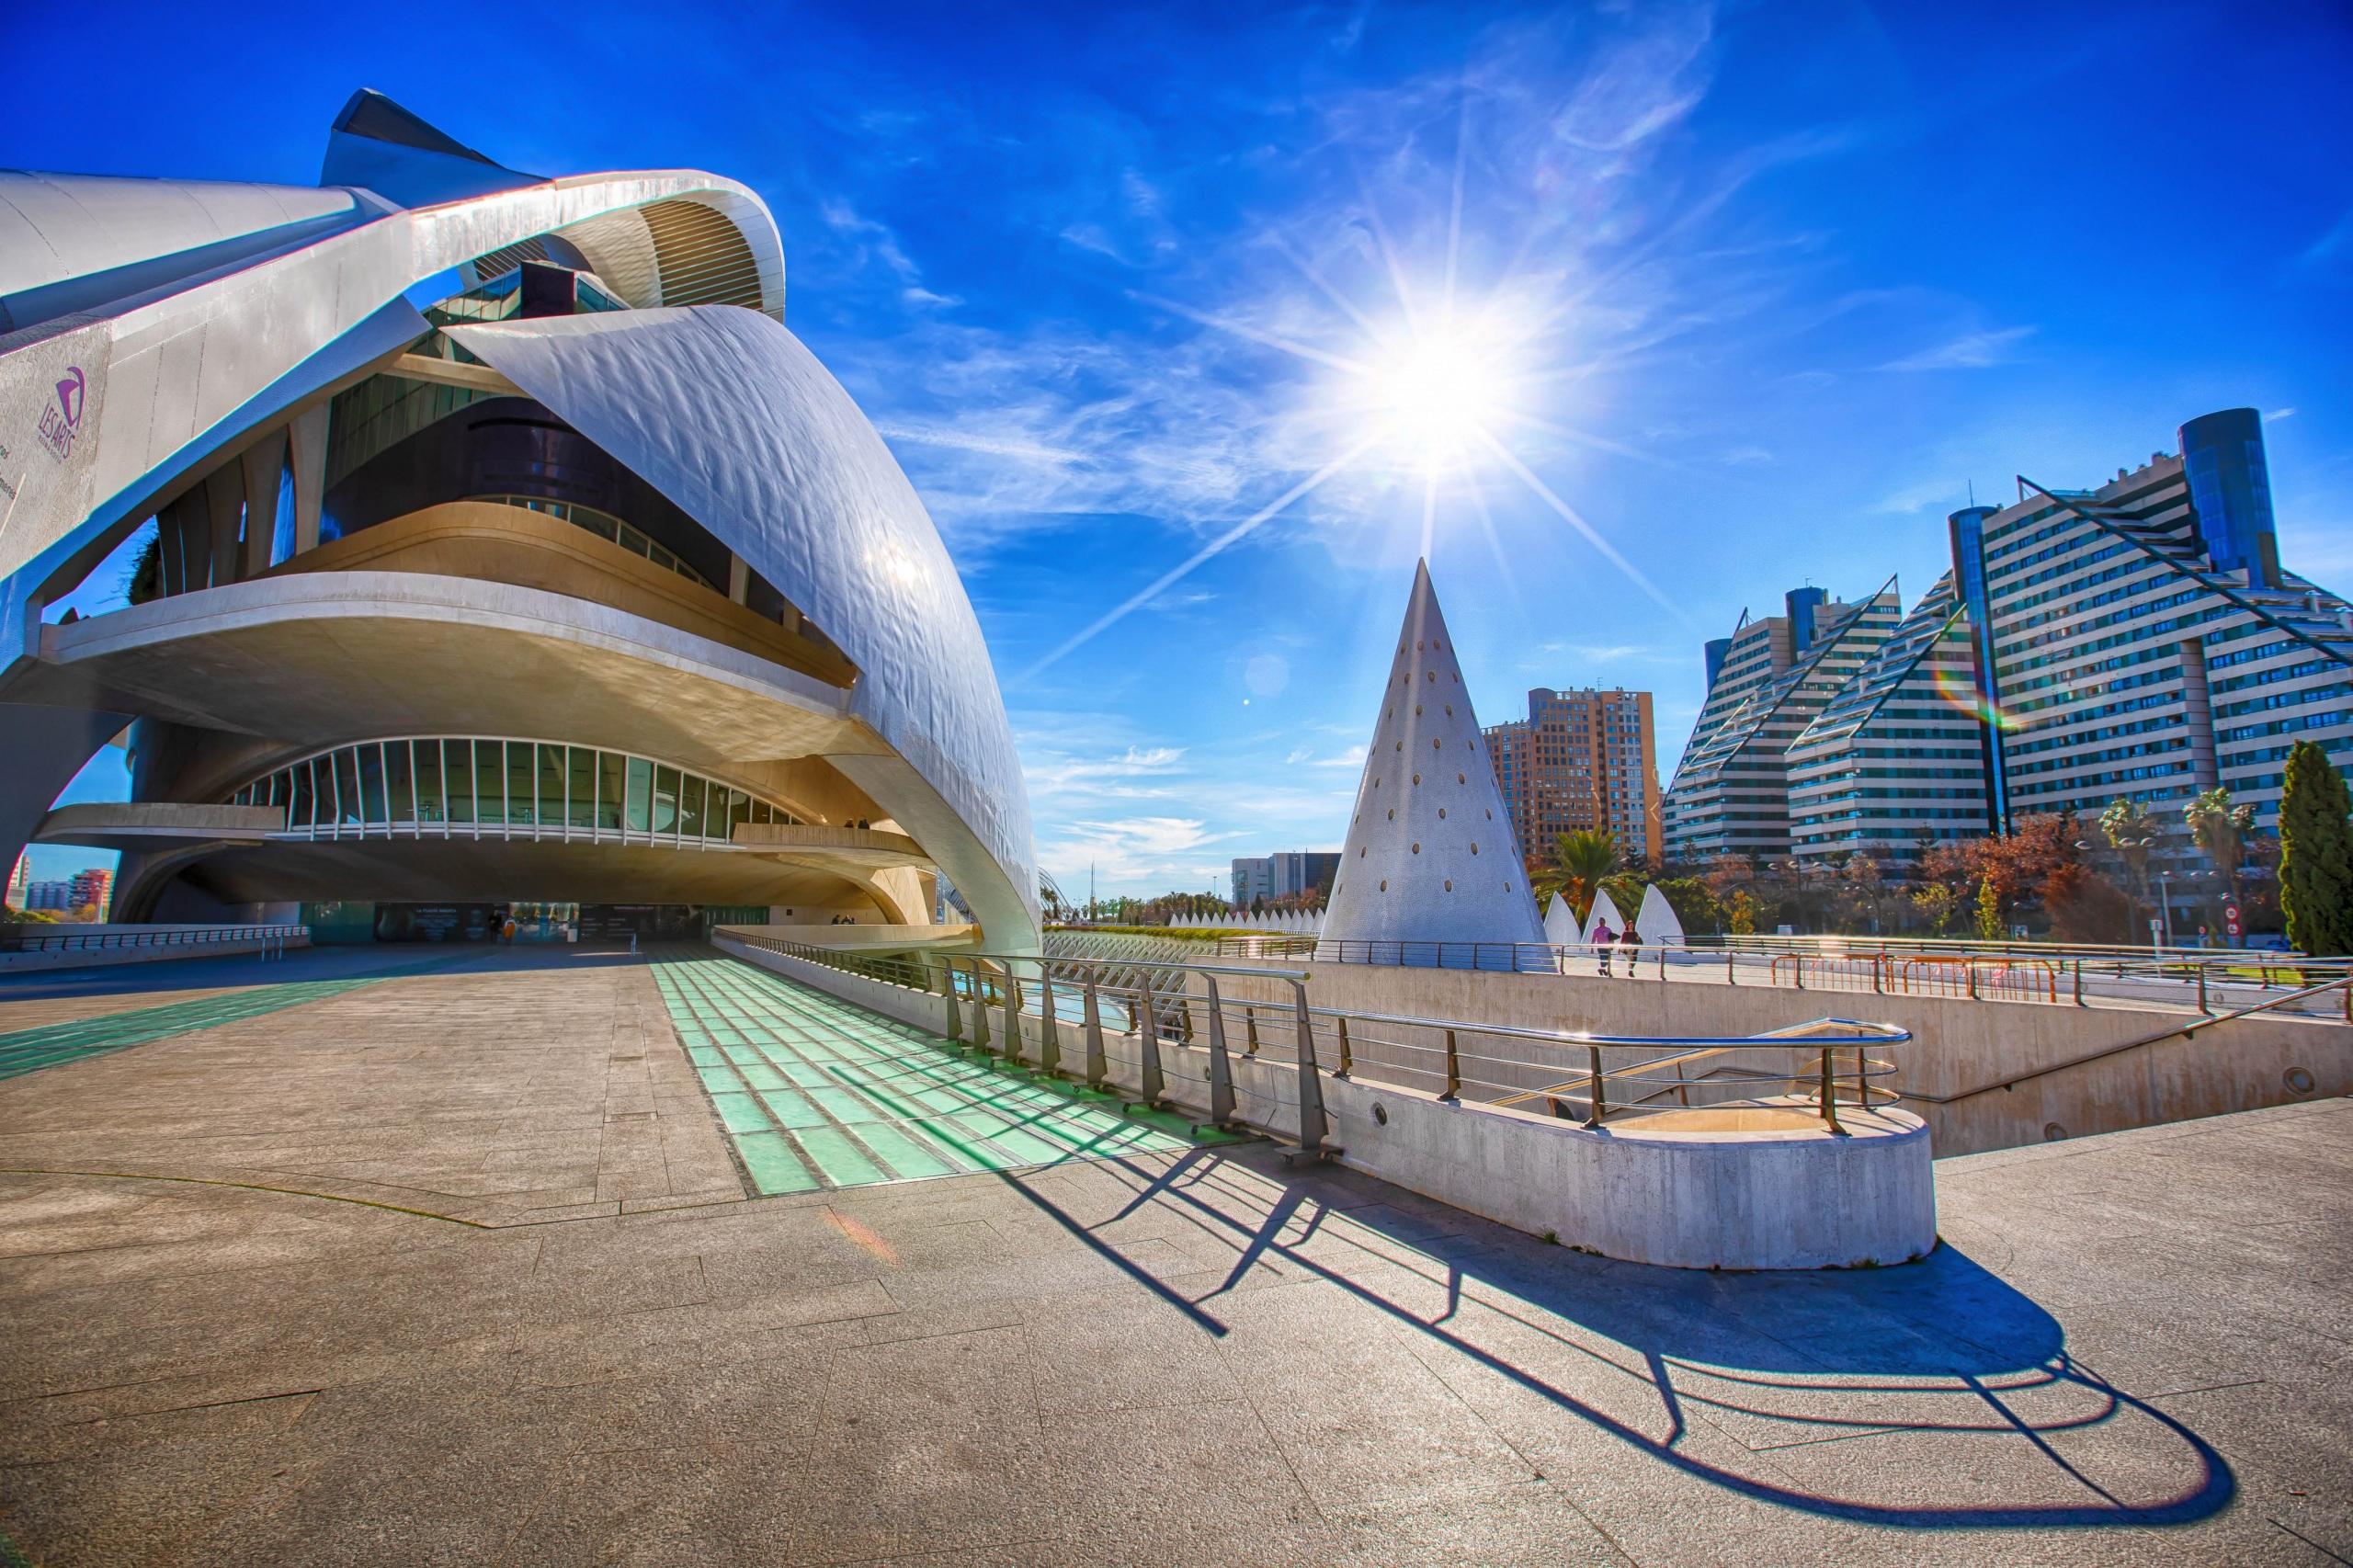 How to get to the City of Arts and Sciences